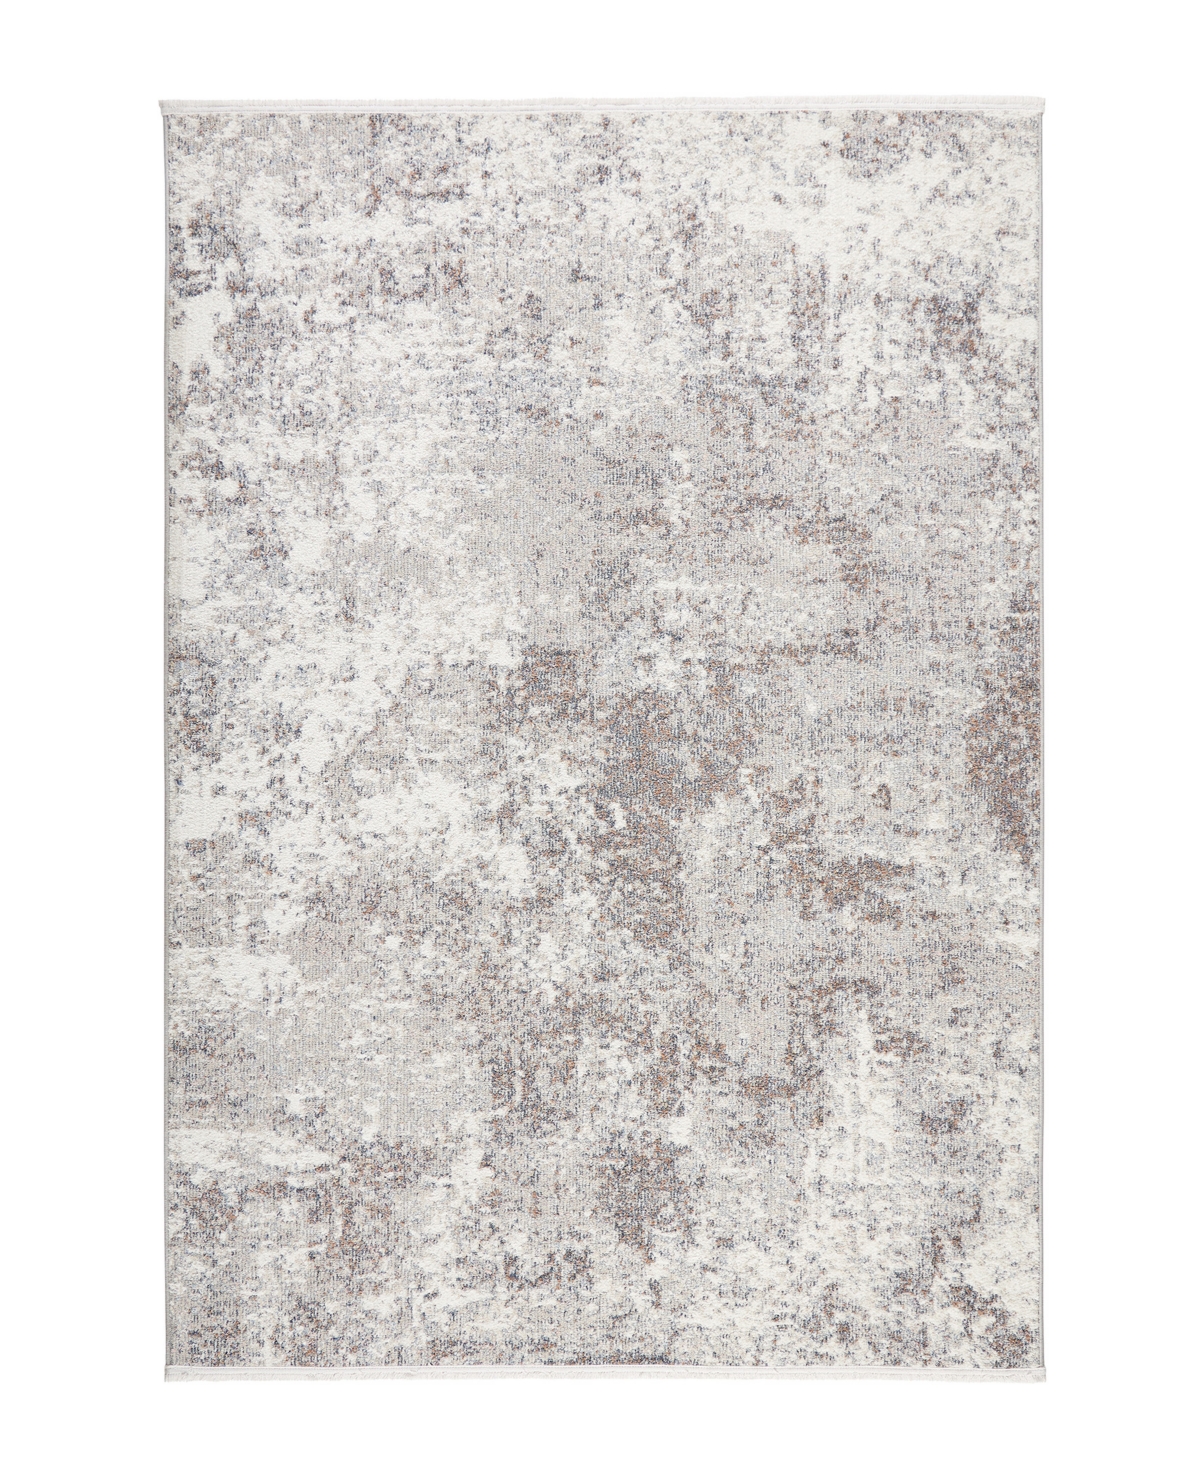 Town & Country Living Everyday Rein Everwash 12 5'2" X 7'2" Area Rug In Gray